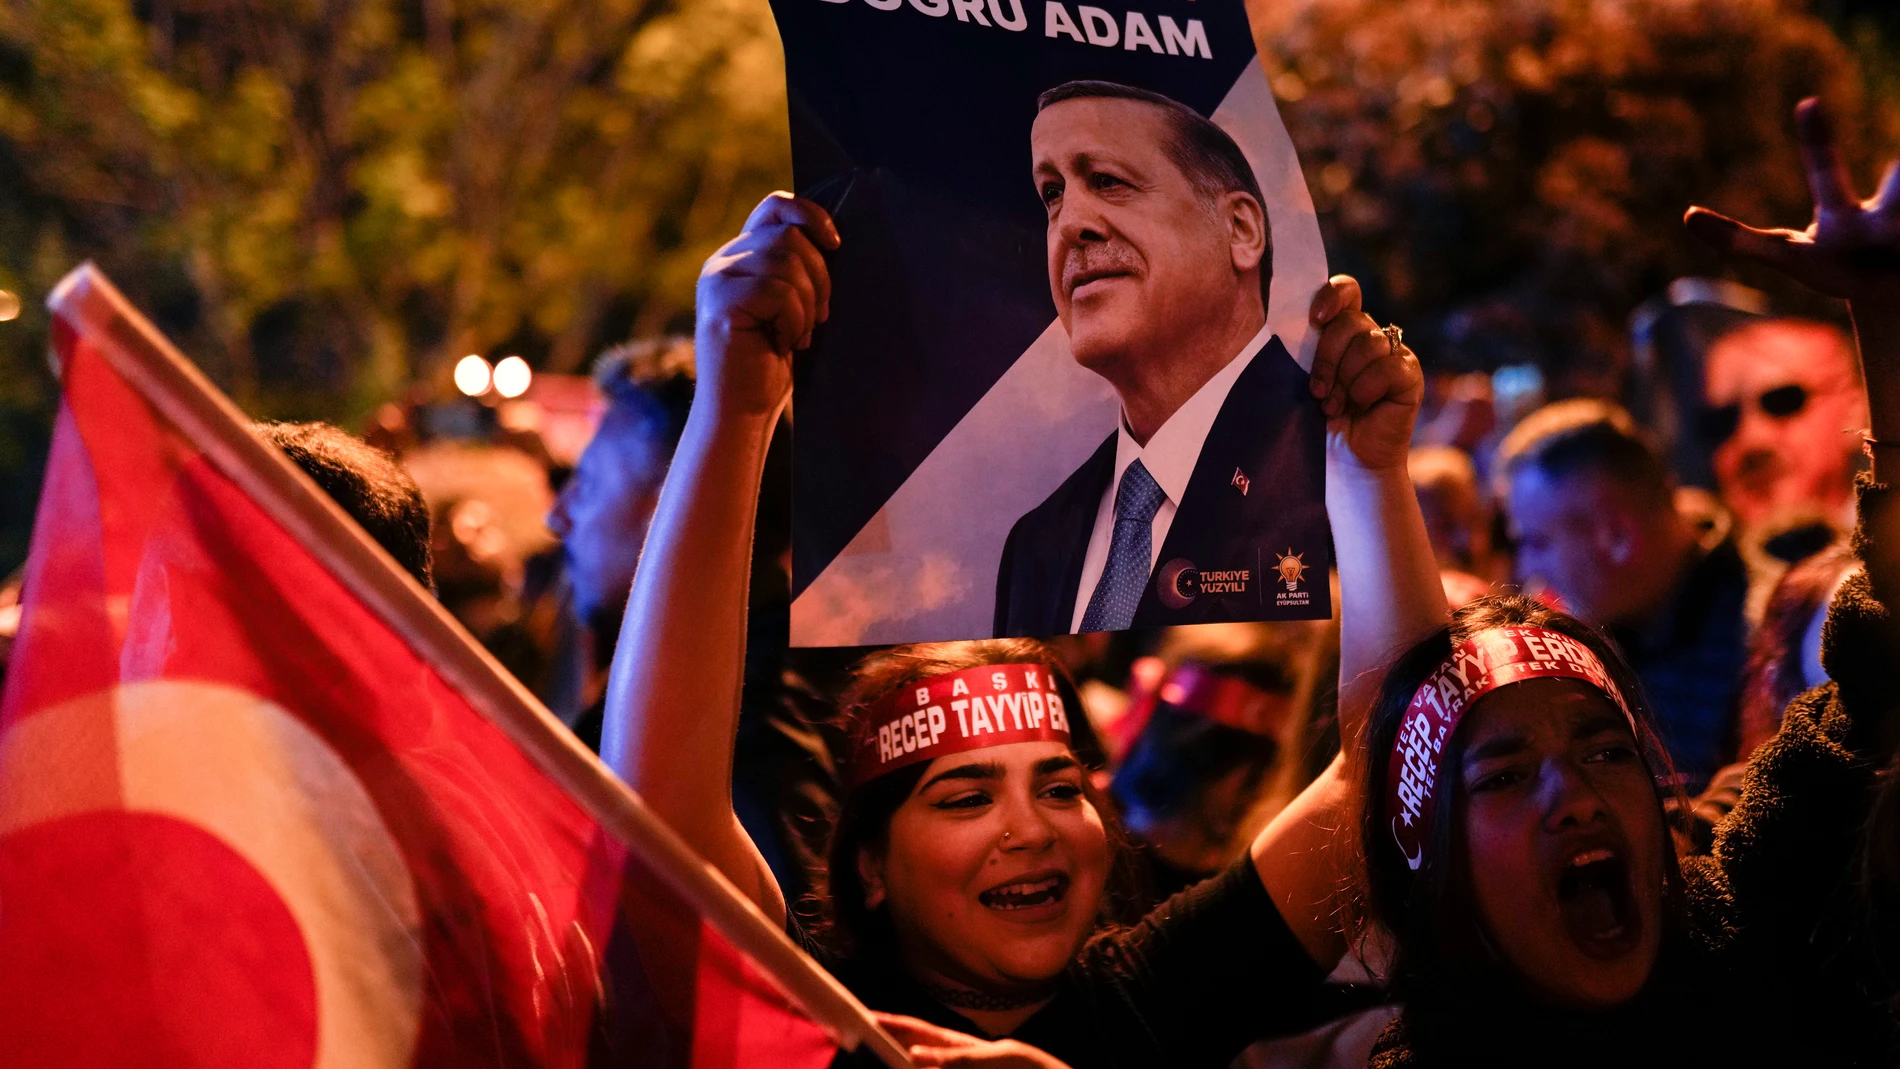 Supporters of Turkish President Recep Tayyip Erdogan cheer outside AKP (Justice and Development Party) headquarters in Istanbul, Turkey, Sunday, May 14, 2023. Turkish President Recep Tayyip Erdogan has remained in power for 20 years by repeatedly surmounting political crises: mass protests, corruption allegations, an attempted military coup and a huge influx of refugees fleeing Syria's civil war. Now the Turkish people and economy are being pummeled by sky-high inflation, and many are still recovering from a devastating earthquake in February made worse by the government's slow response. (AP Photo/Francisco Seco)